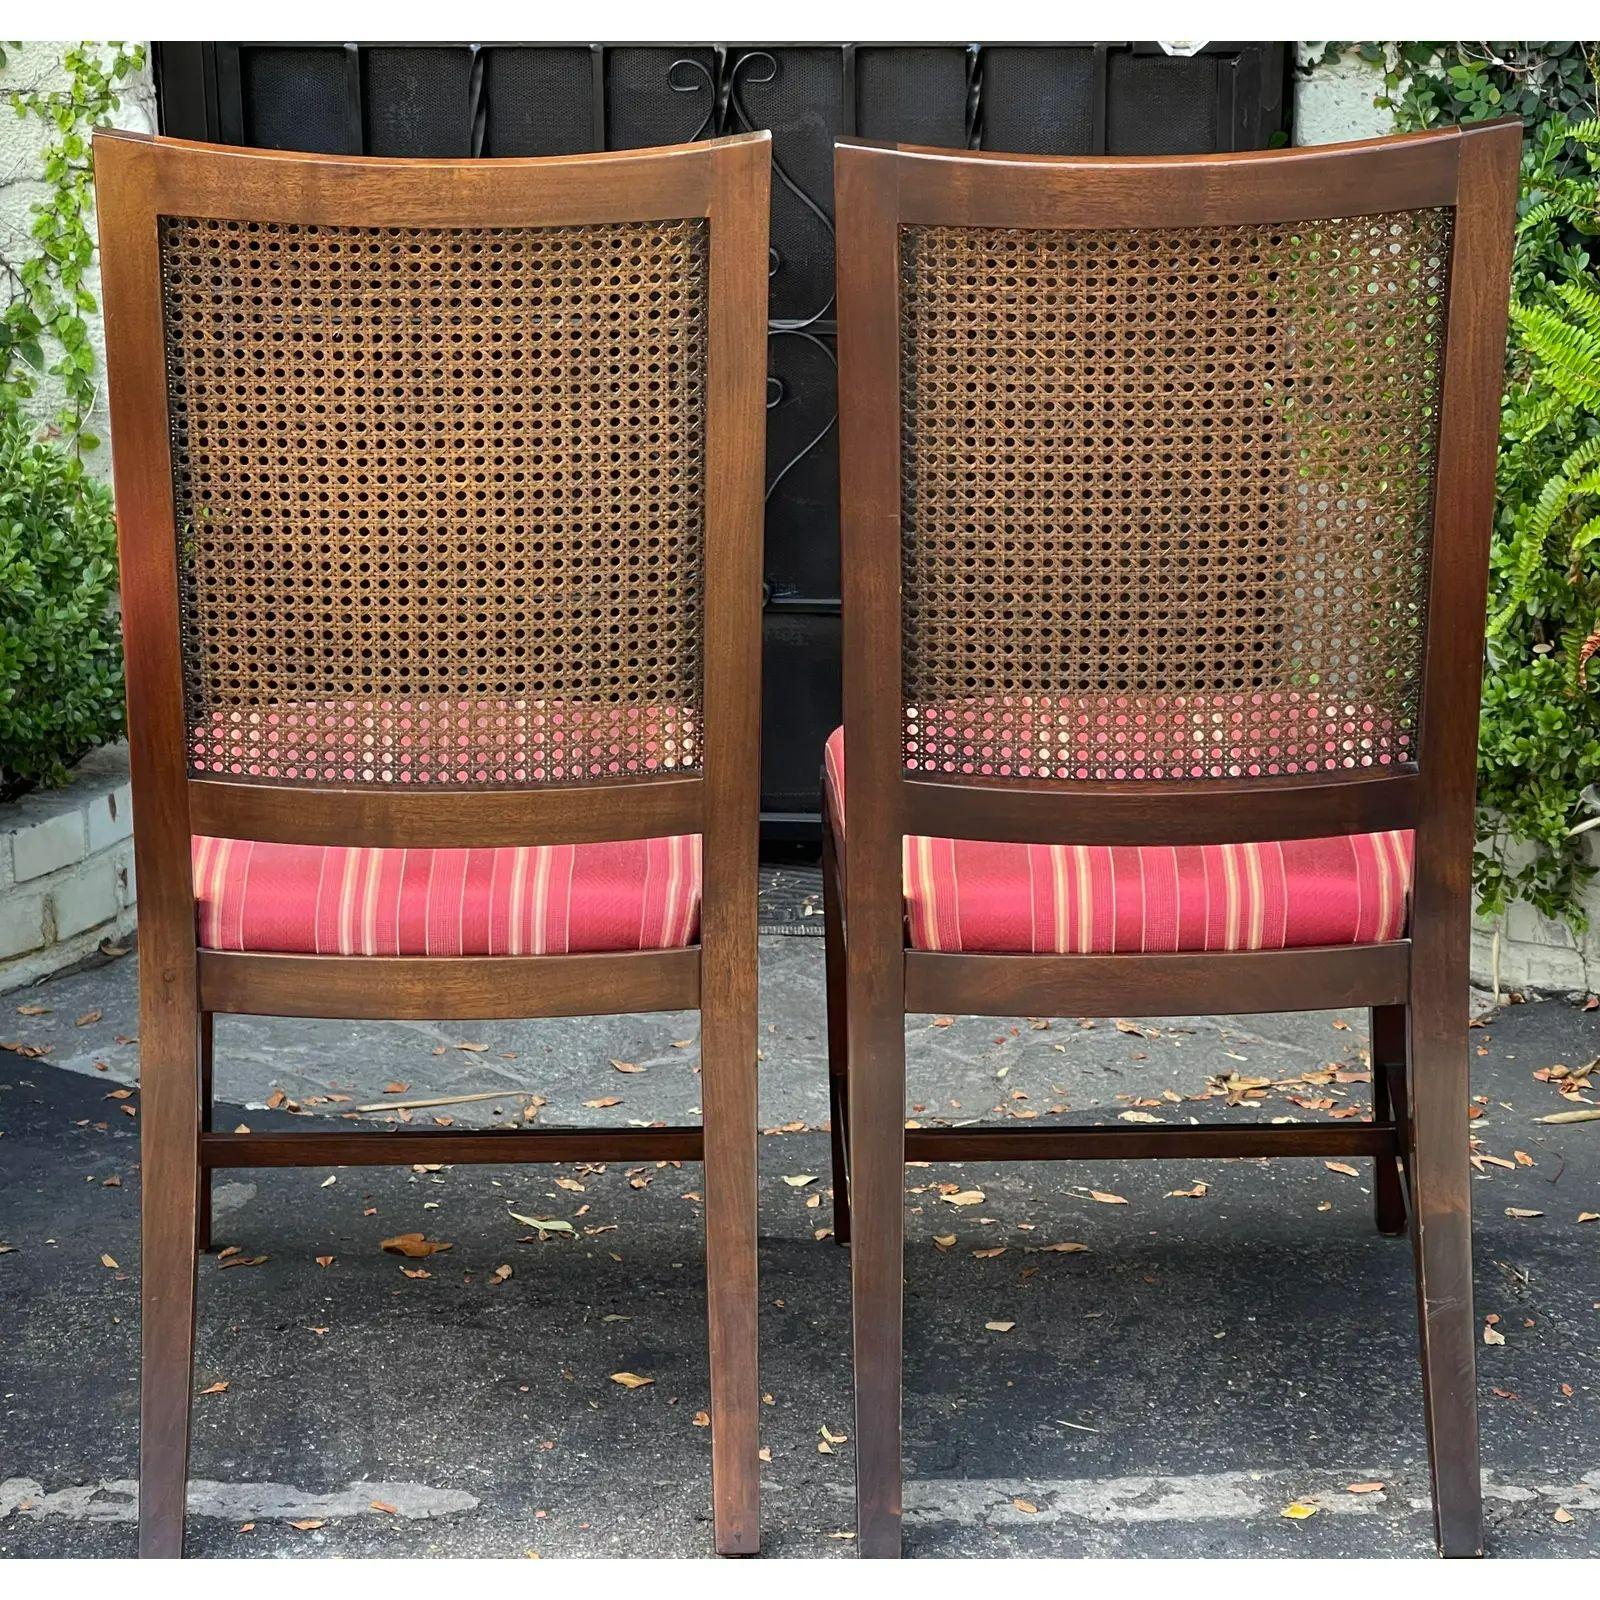 Dessin Fournir Regency style mahogany cane back dining chairs - a pair.
Additional information:
Materials: Caning, mahogany
Please note that this item contains materials that are legally subject to a special export process that may extend the